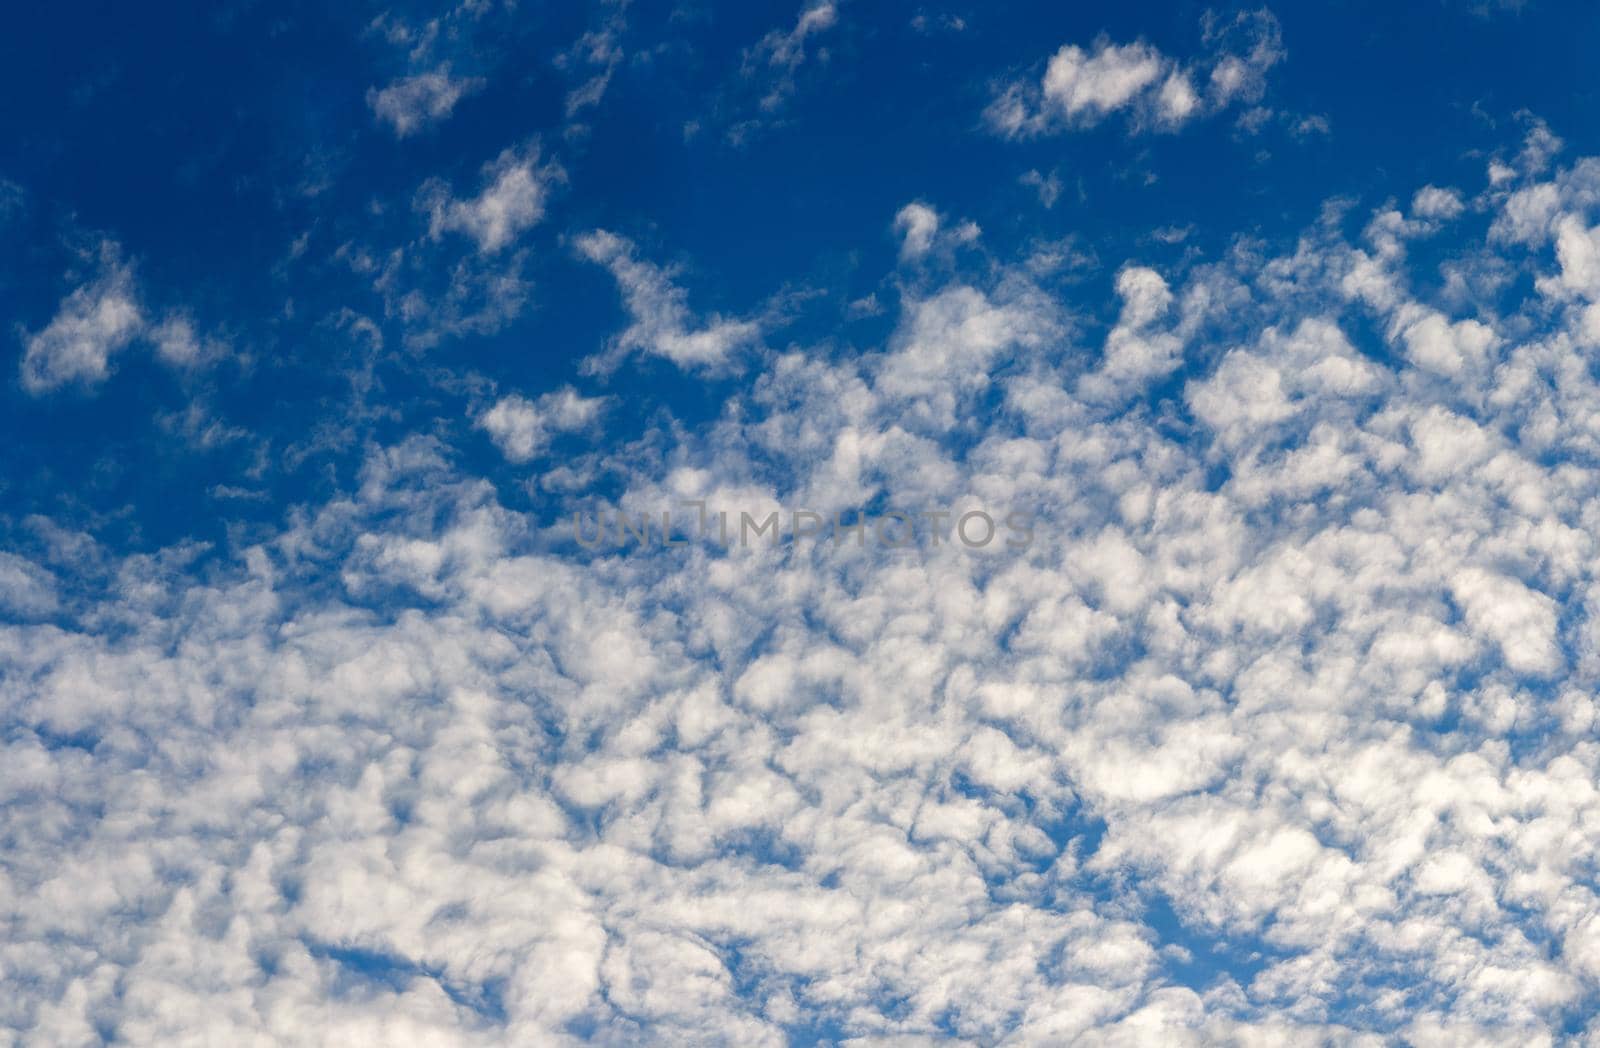 white evening altocumulus clouds on blue sky full frame background by z1b